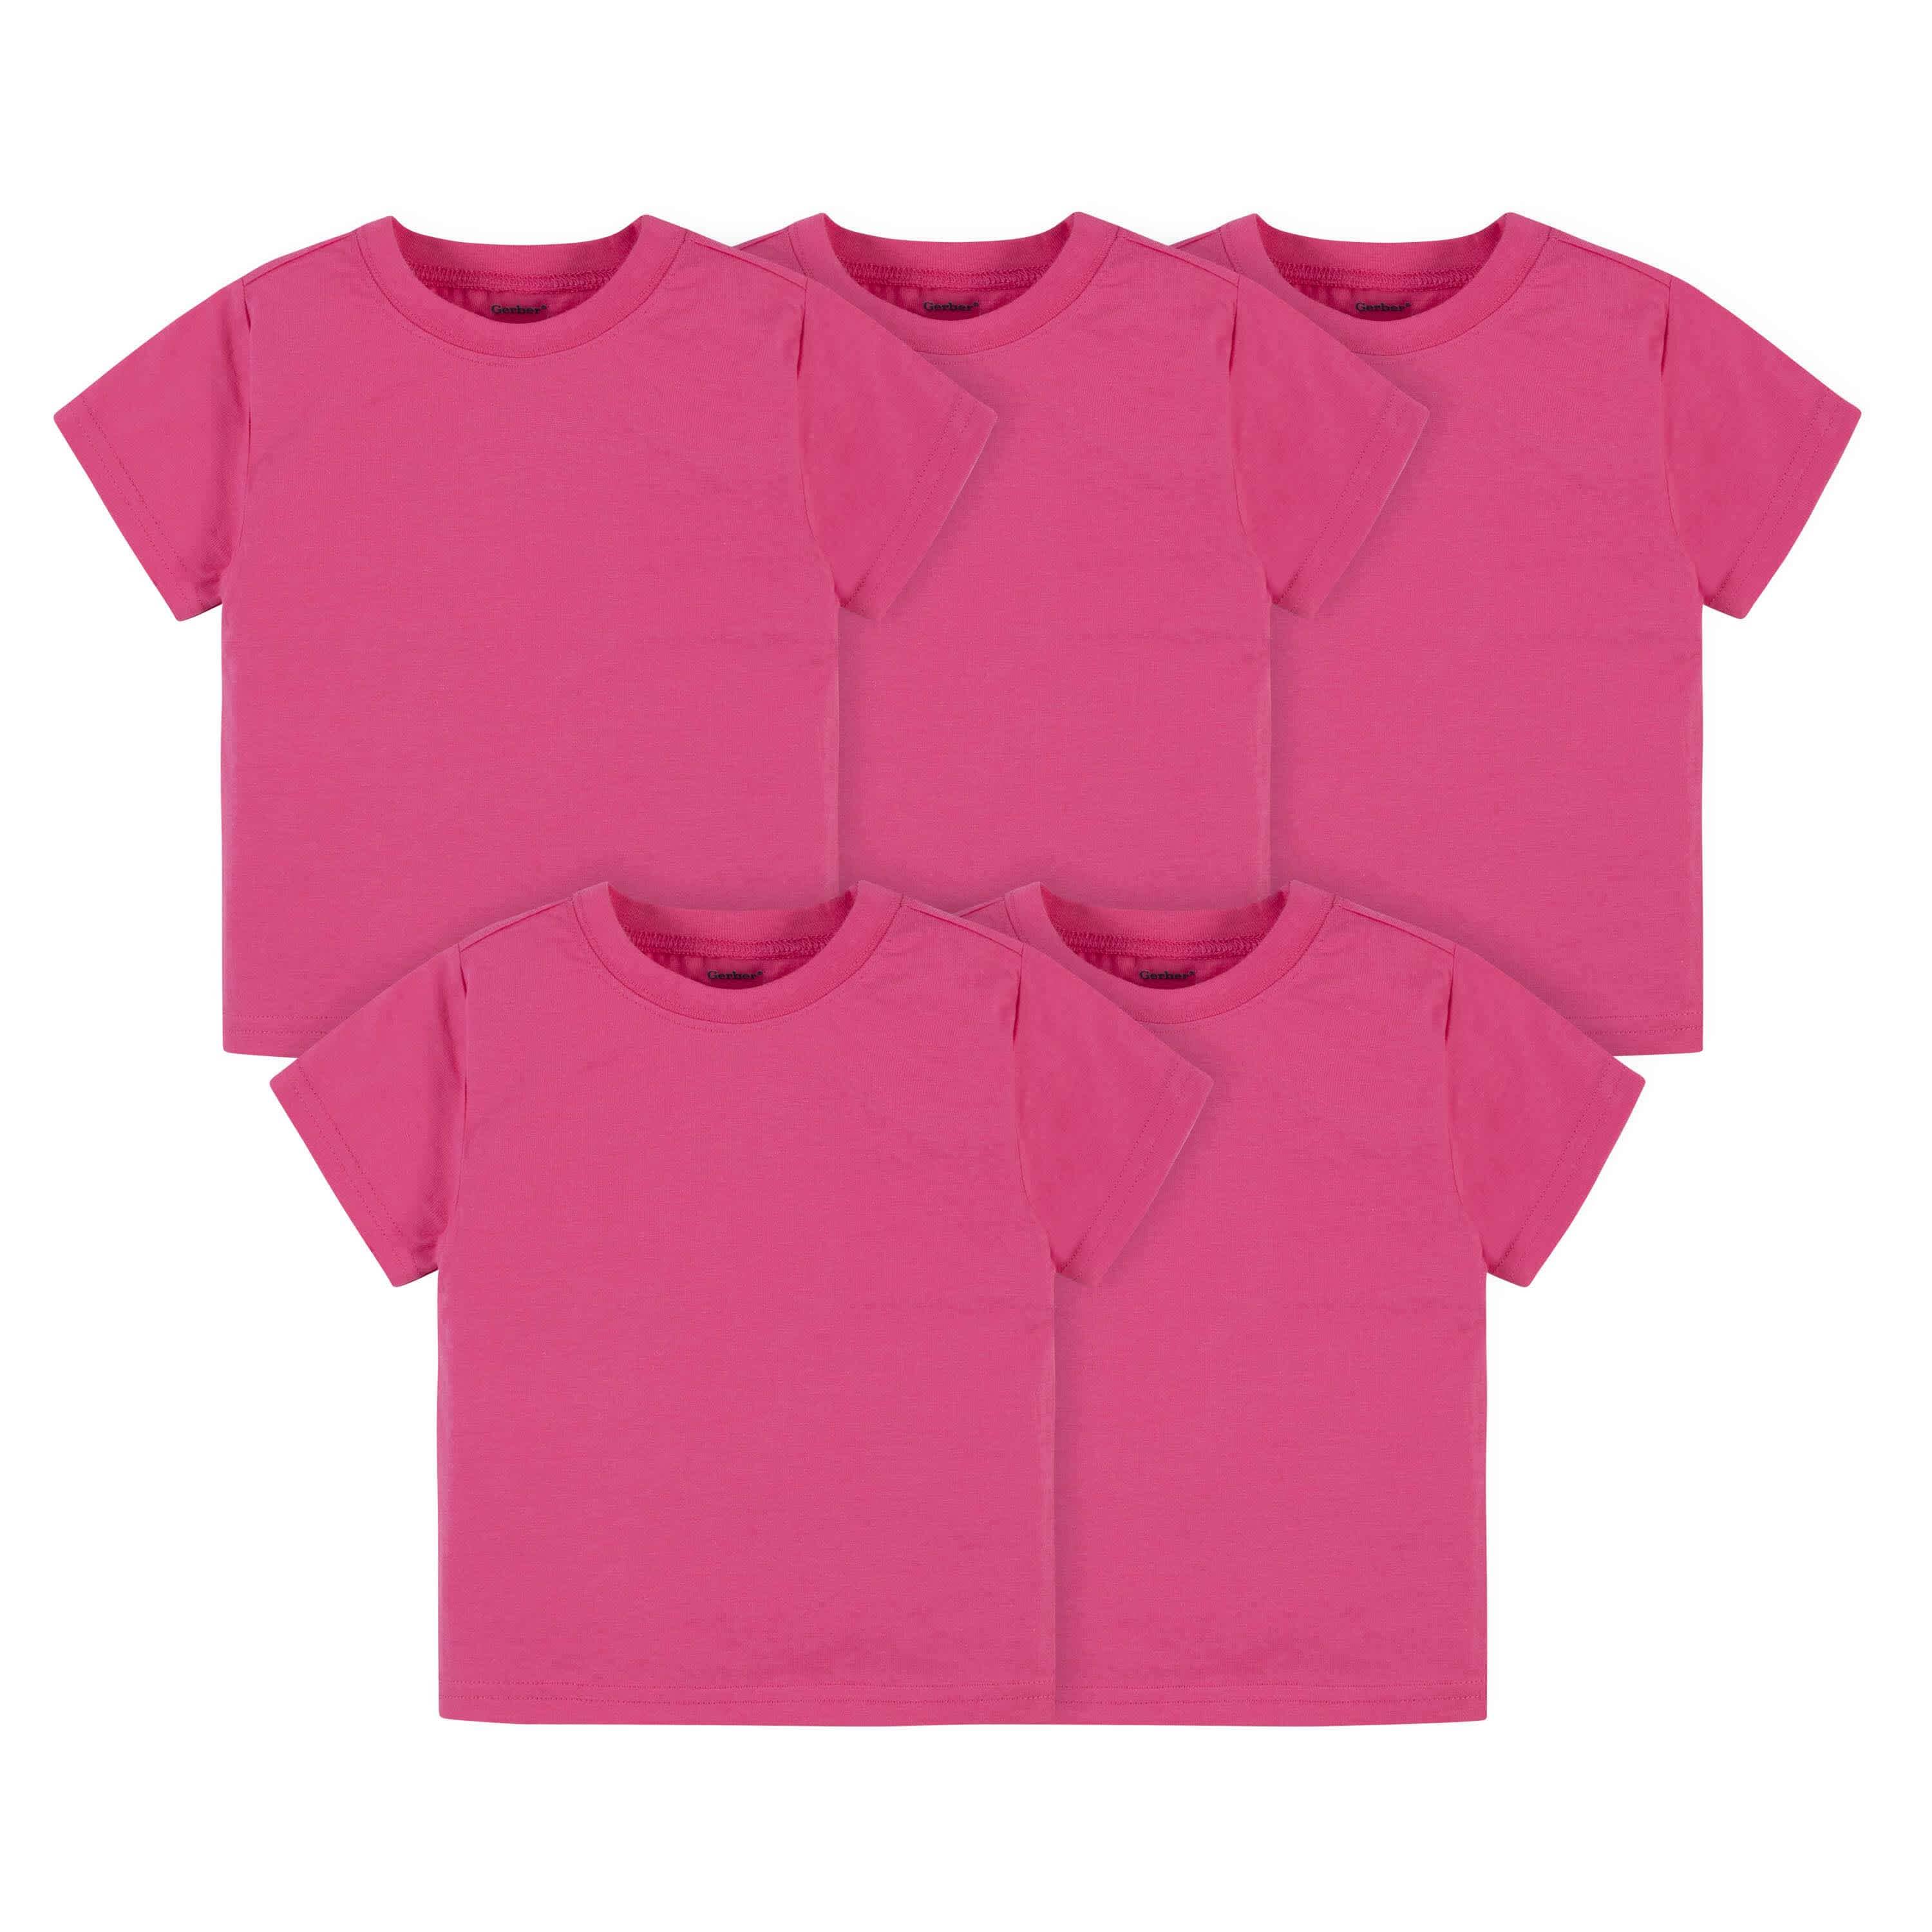 40% Off Solid Toddler Tee - Soft Pink - 6T Regular $25. NOW